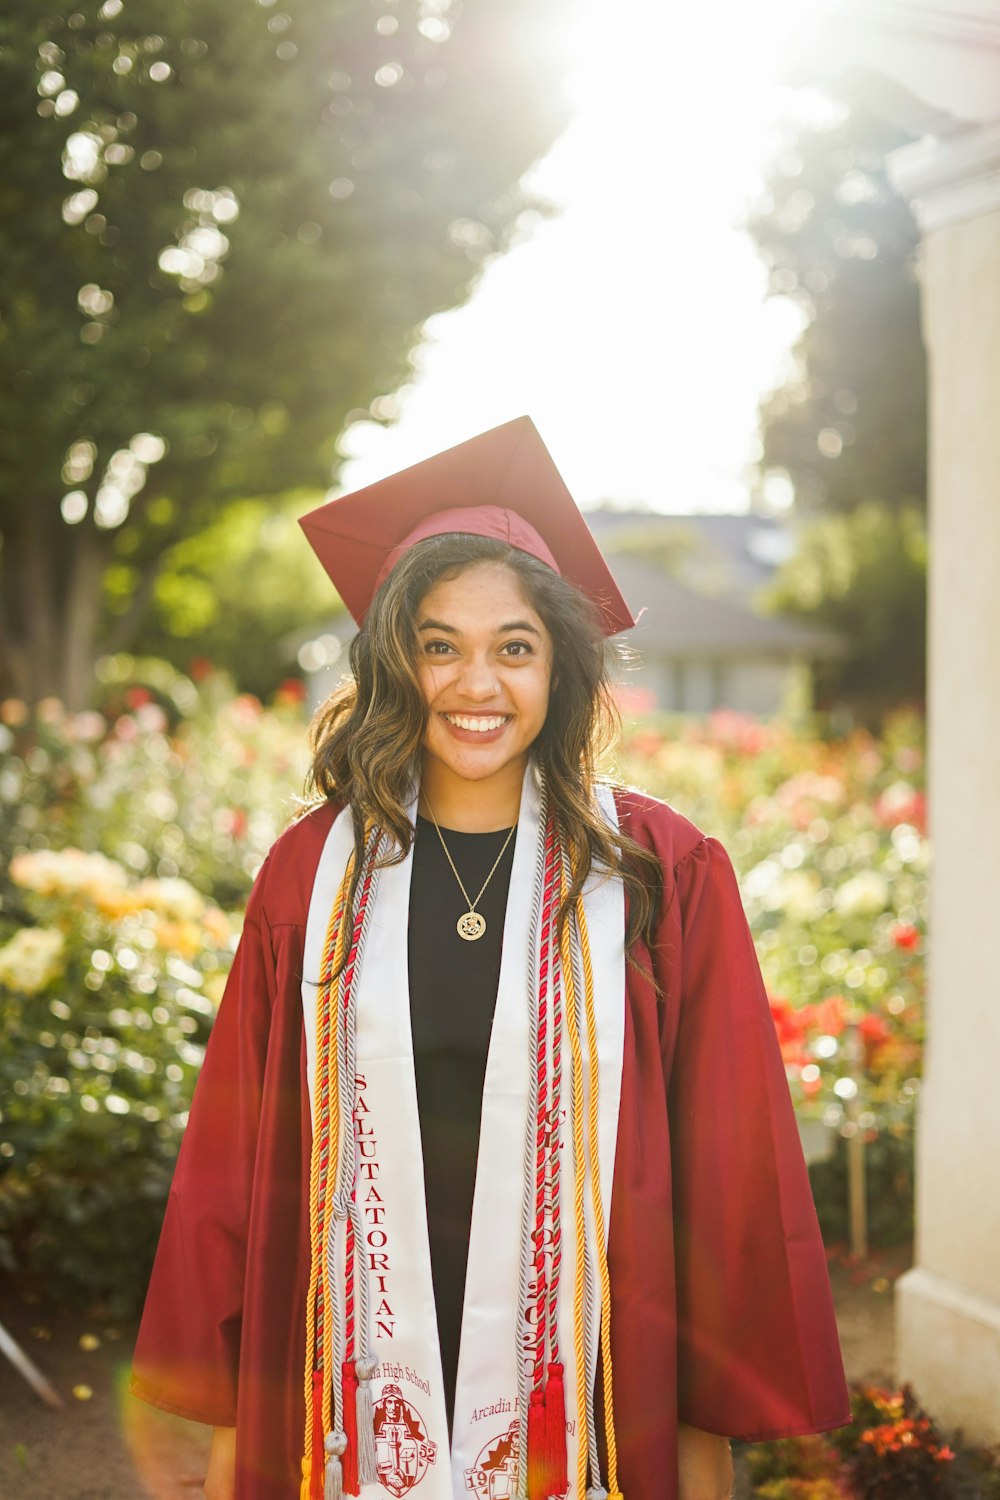 100+ Graduate Pictures  Download Free Images on Unsplash